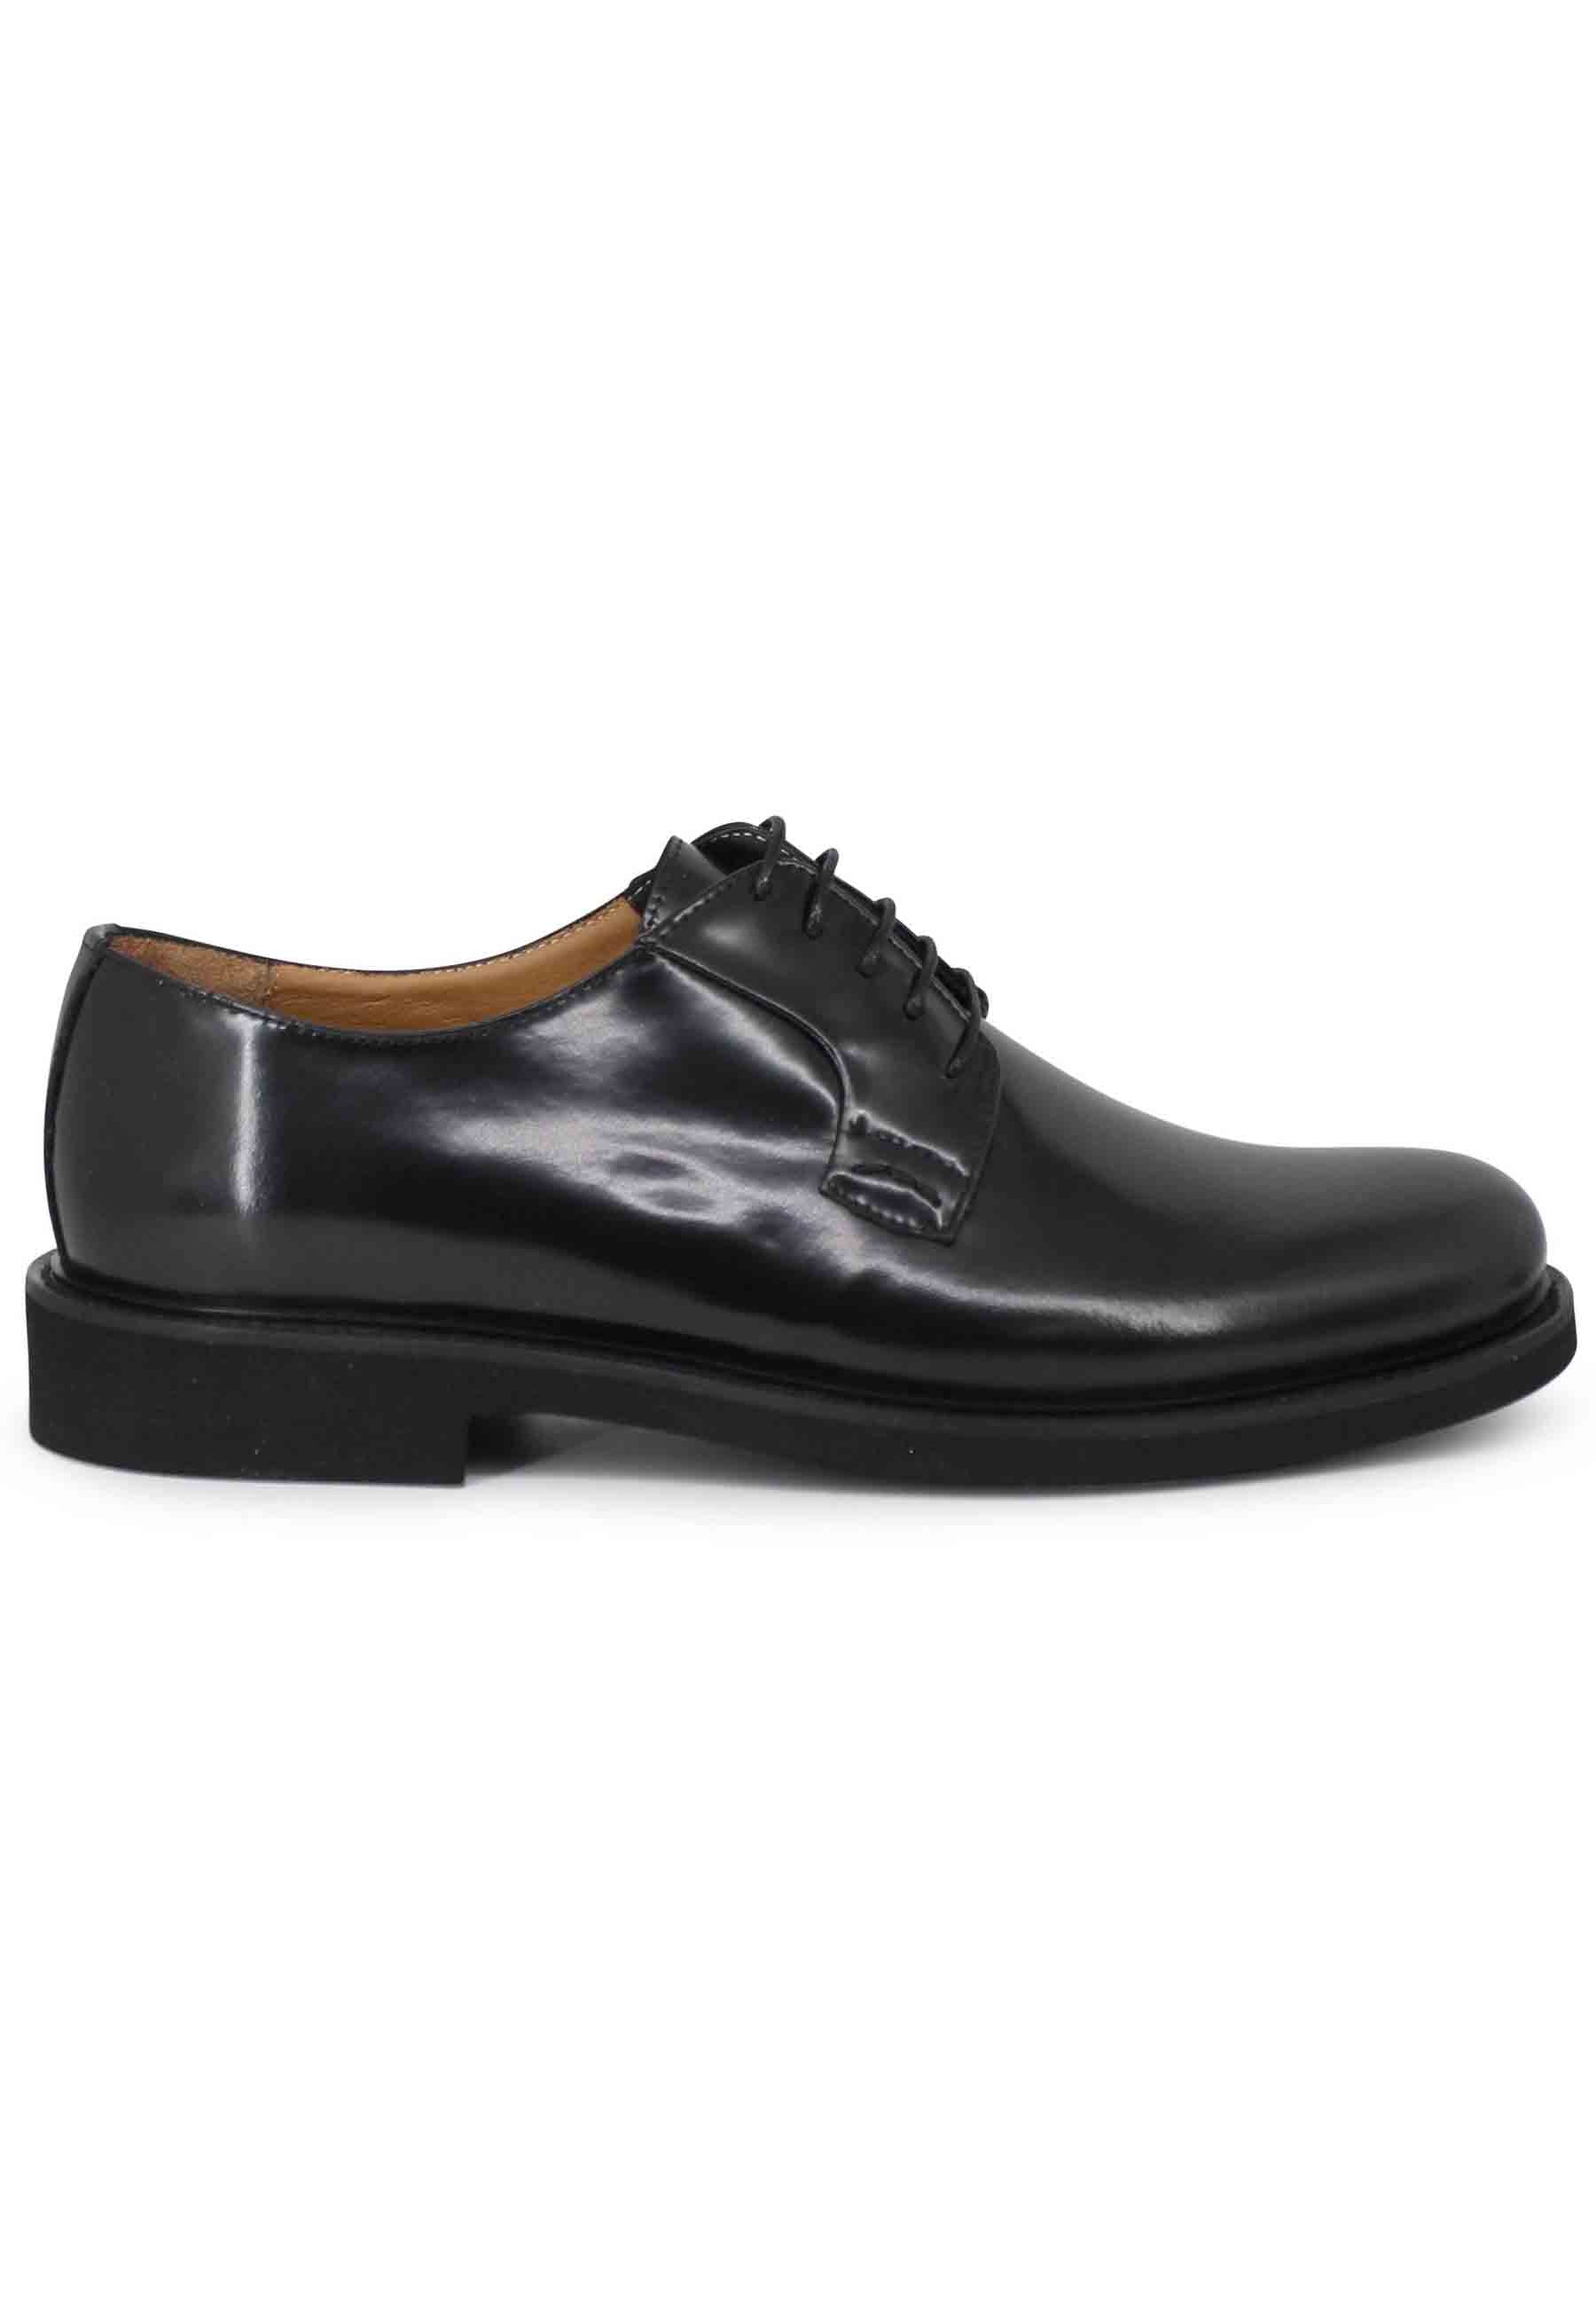 Men's lace-ups in black leather with ultra light rubber sole